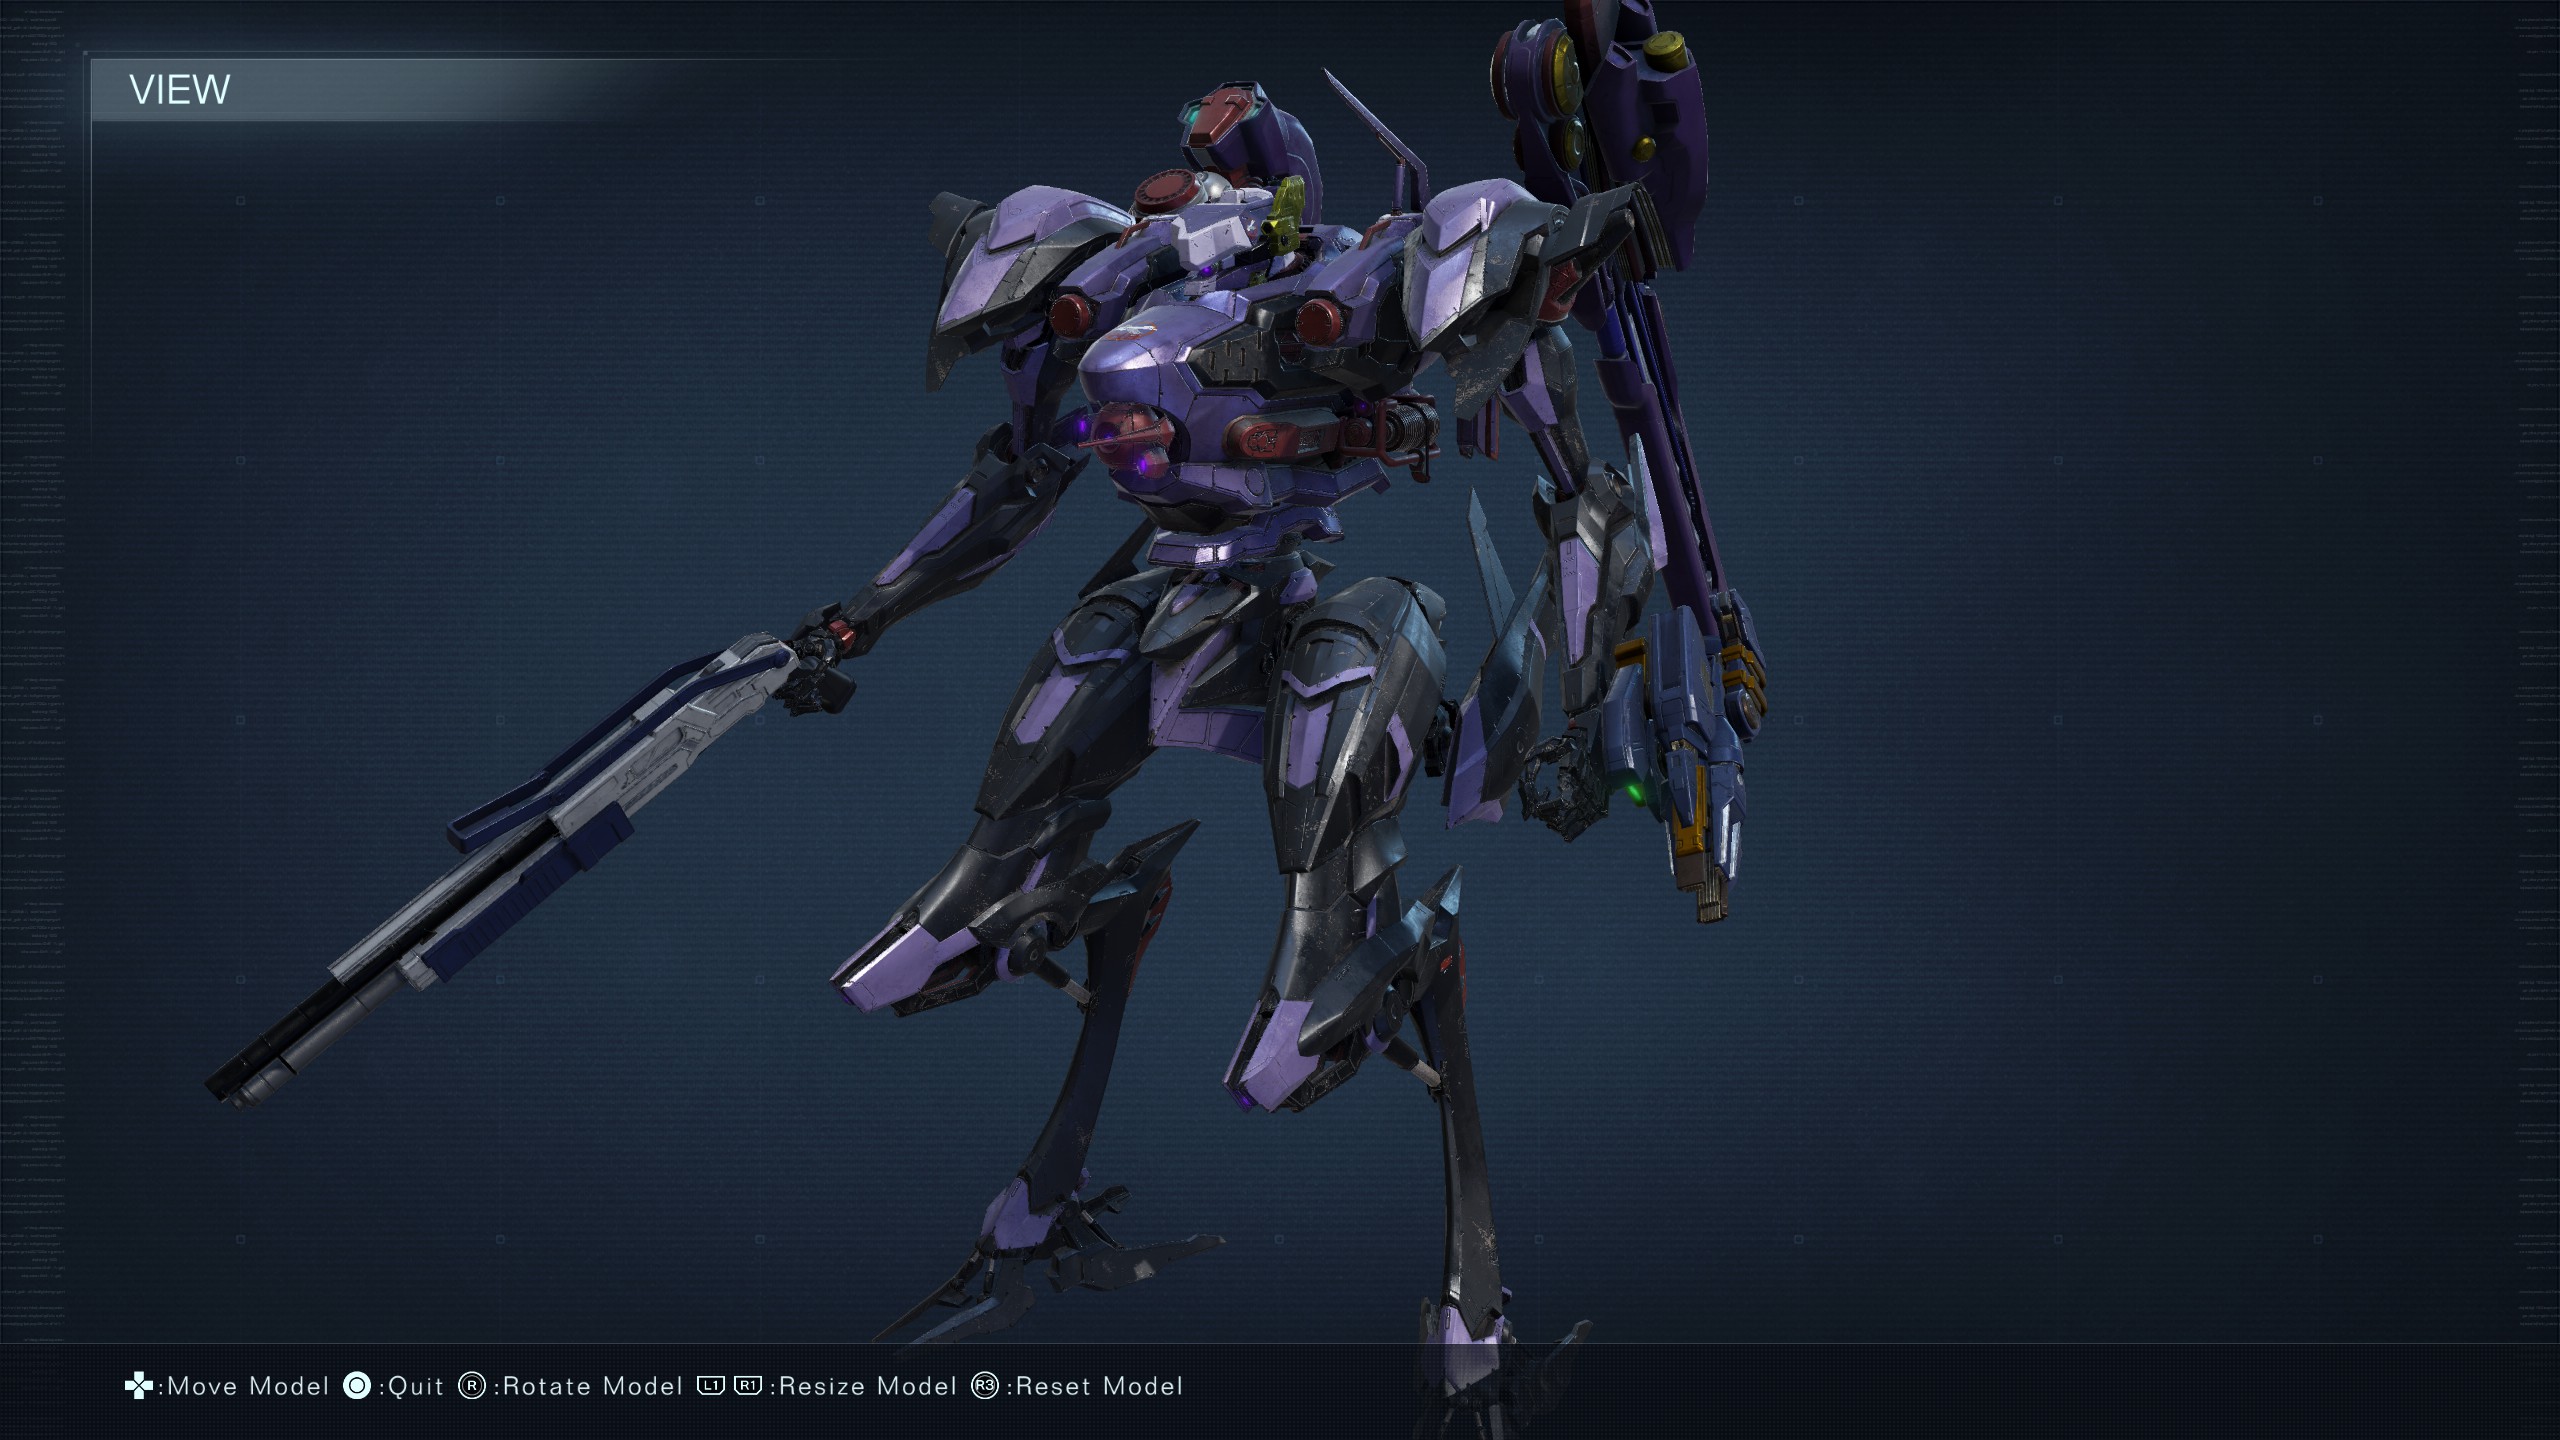 Tips on improving my armored code 3 build? : r/armoredcore